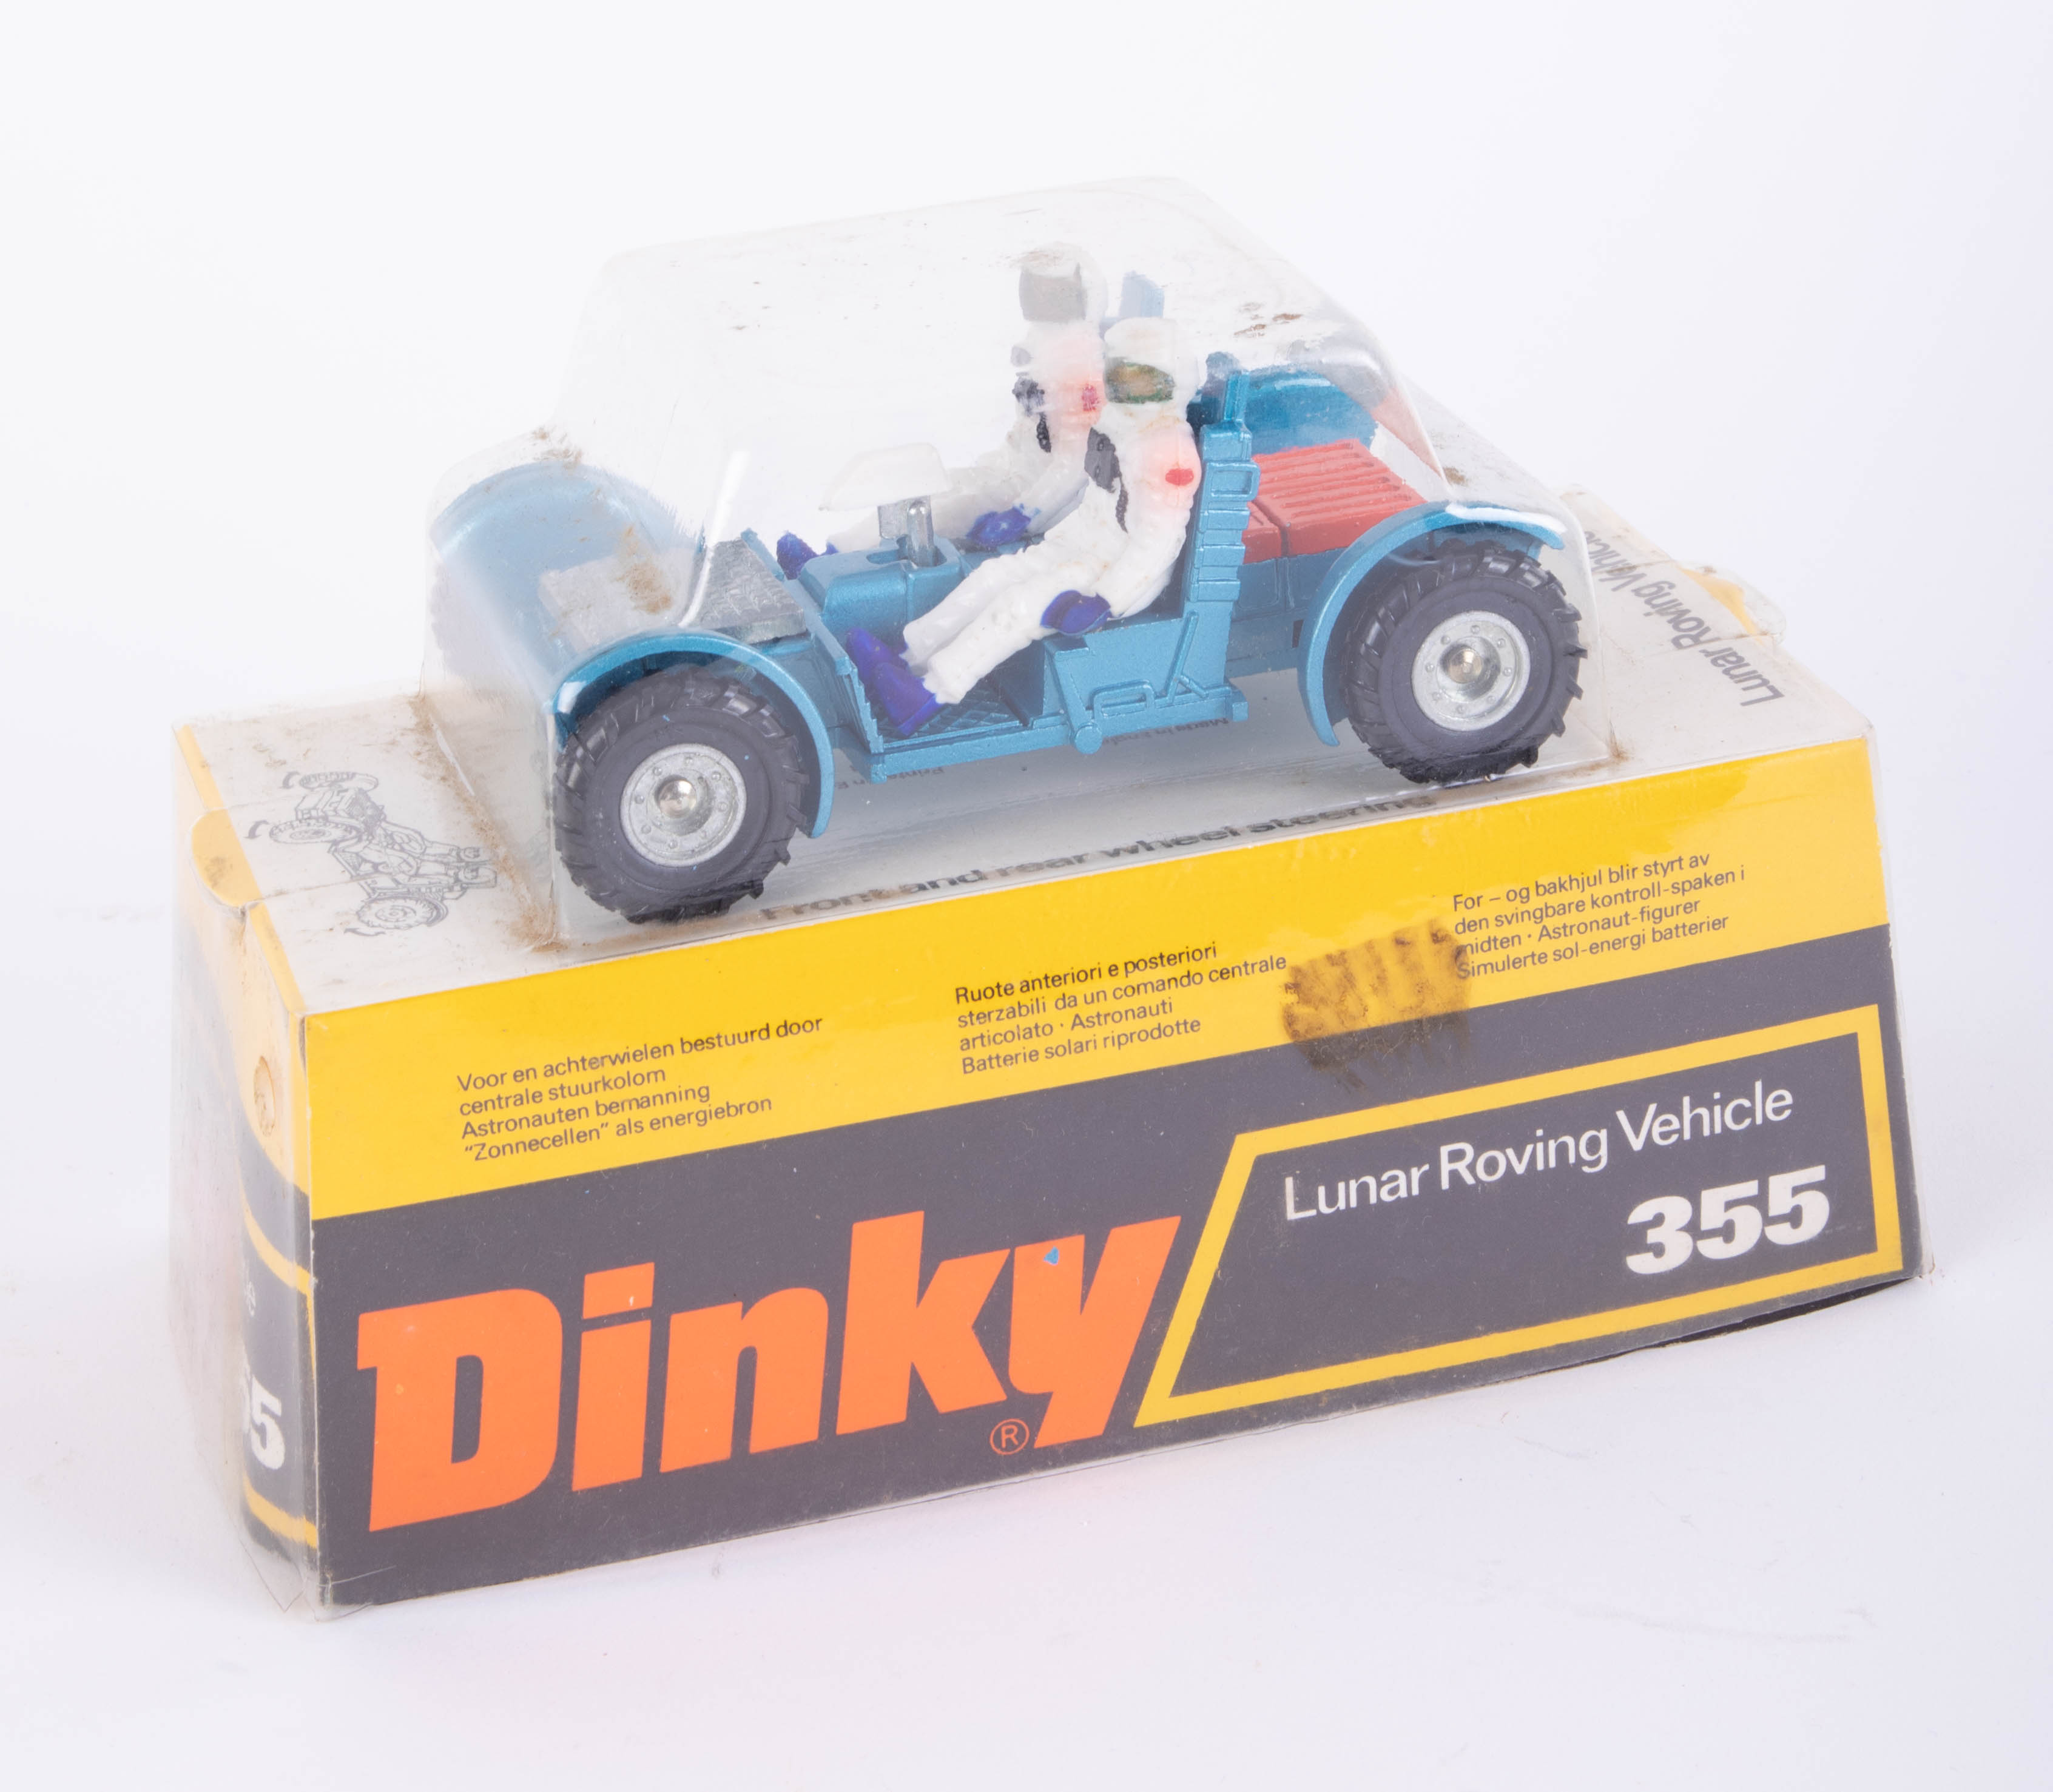 Dinky, Lunar Roving Vehicle, 355, boxed.